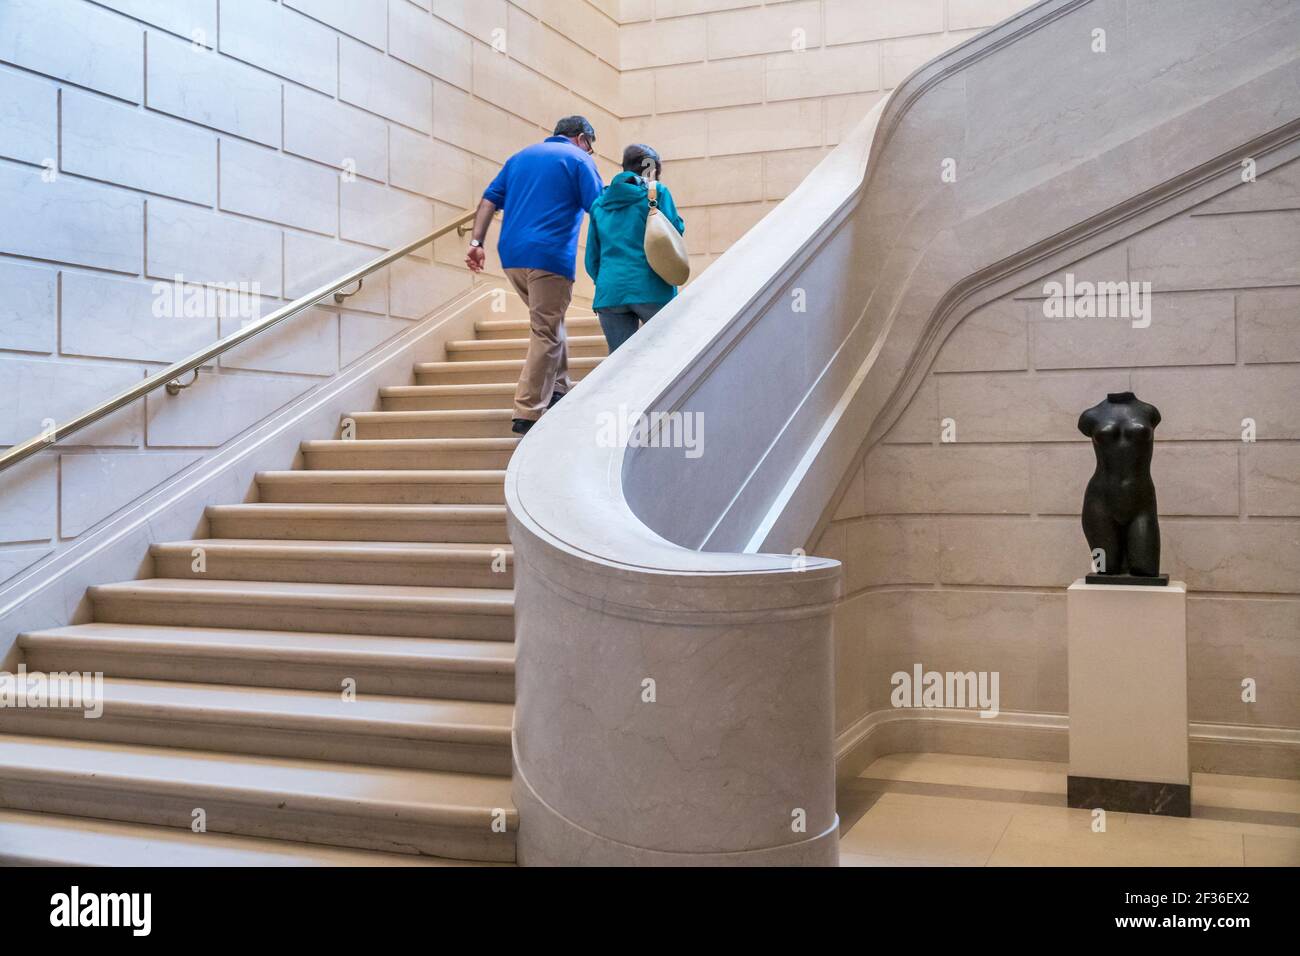 Washington DC,National Gallery of Art Museum,inside interior stairs man woman female couple ascending going up, Stock Photo